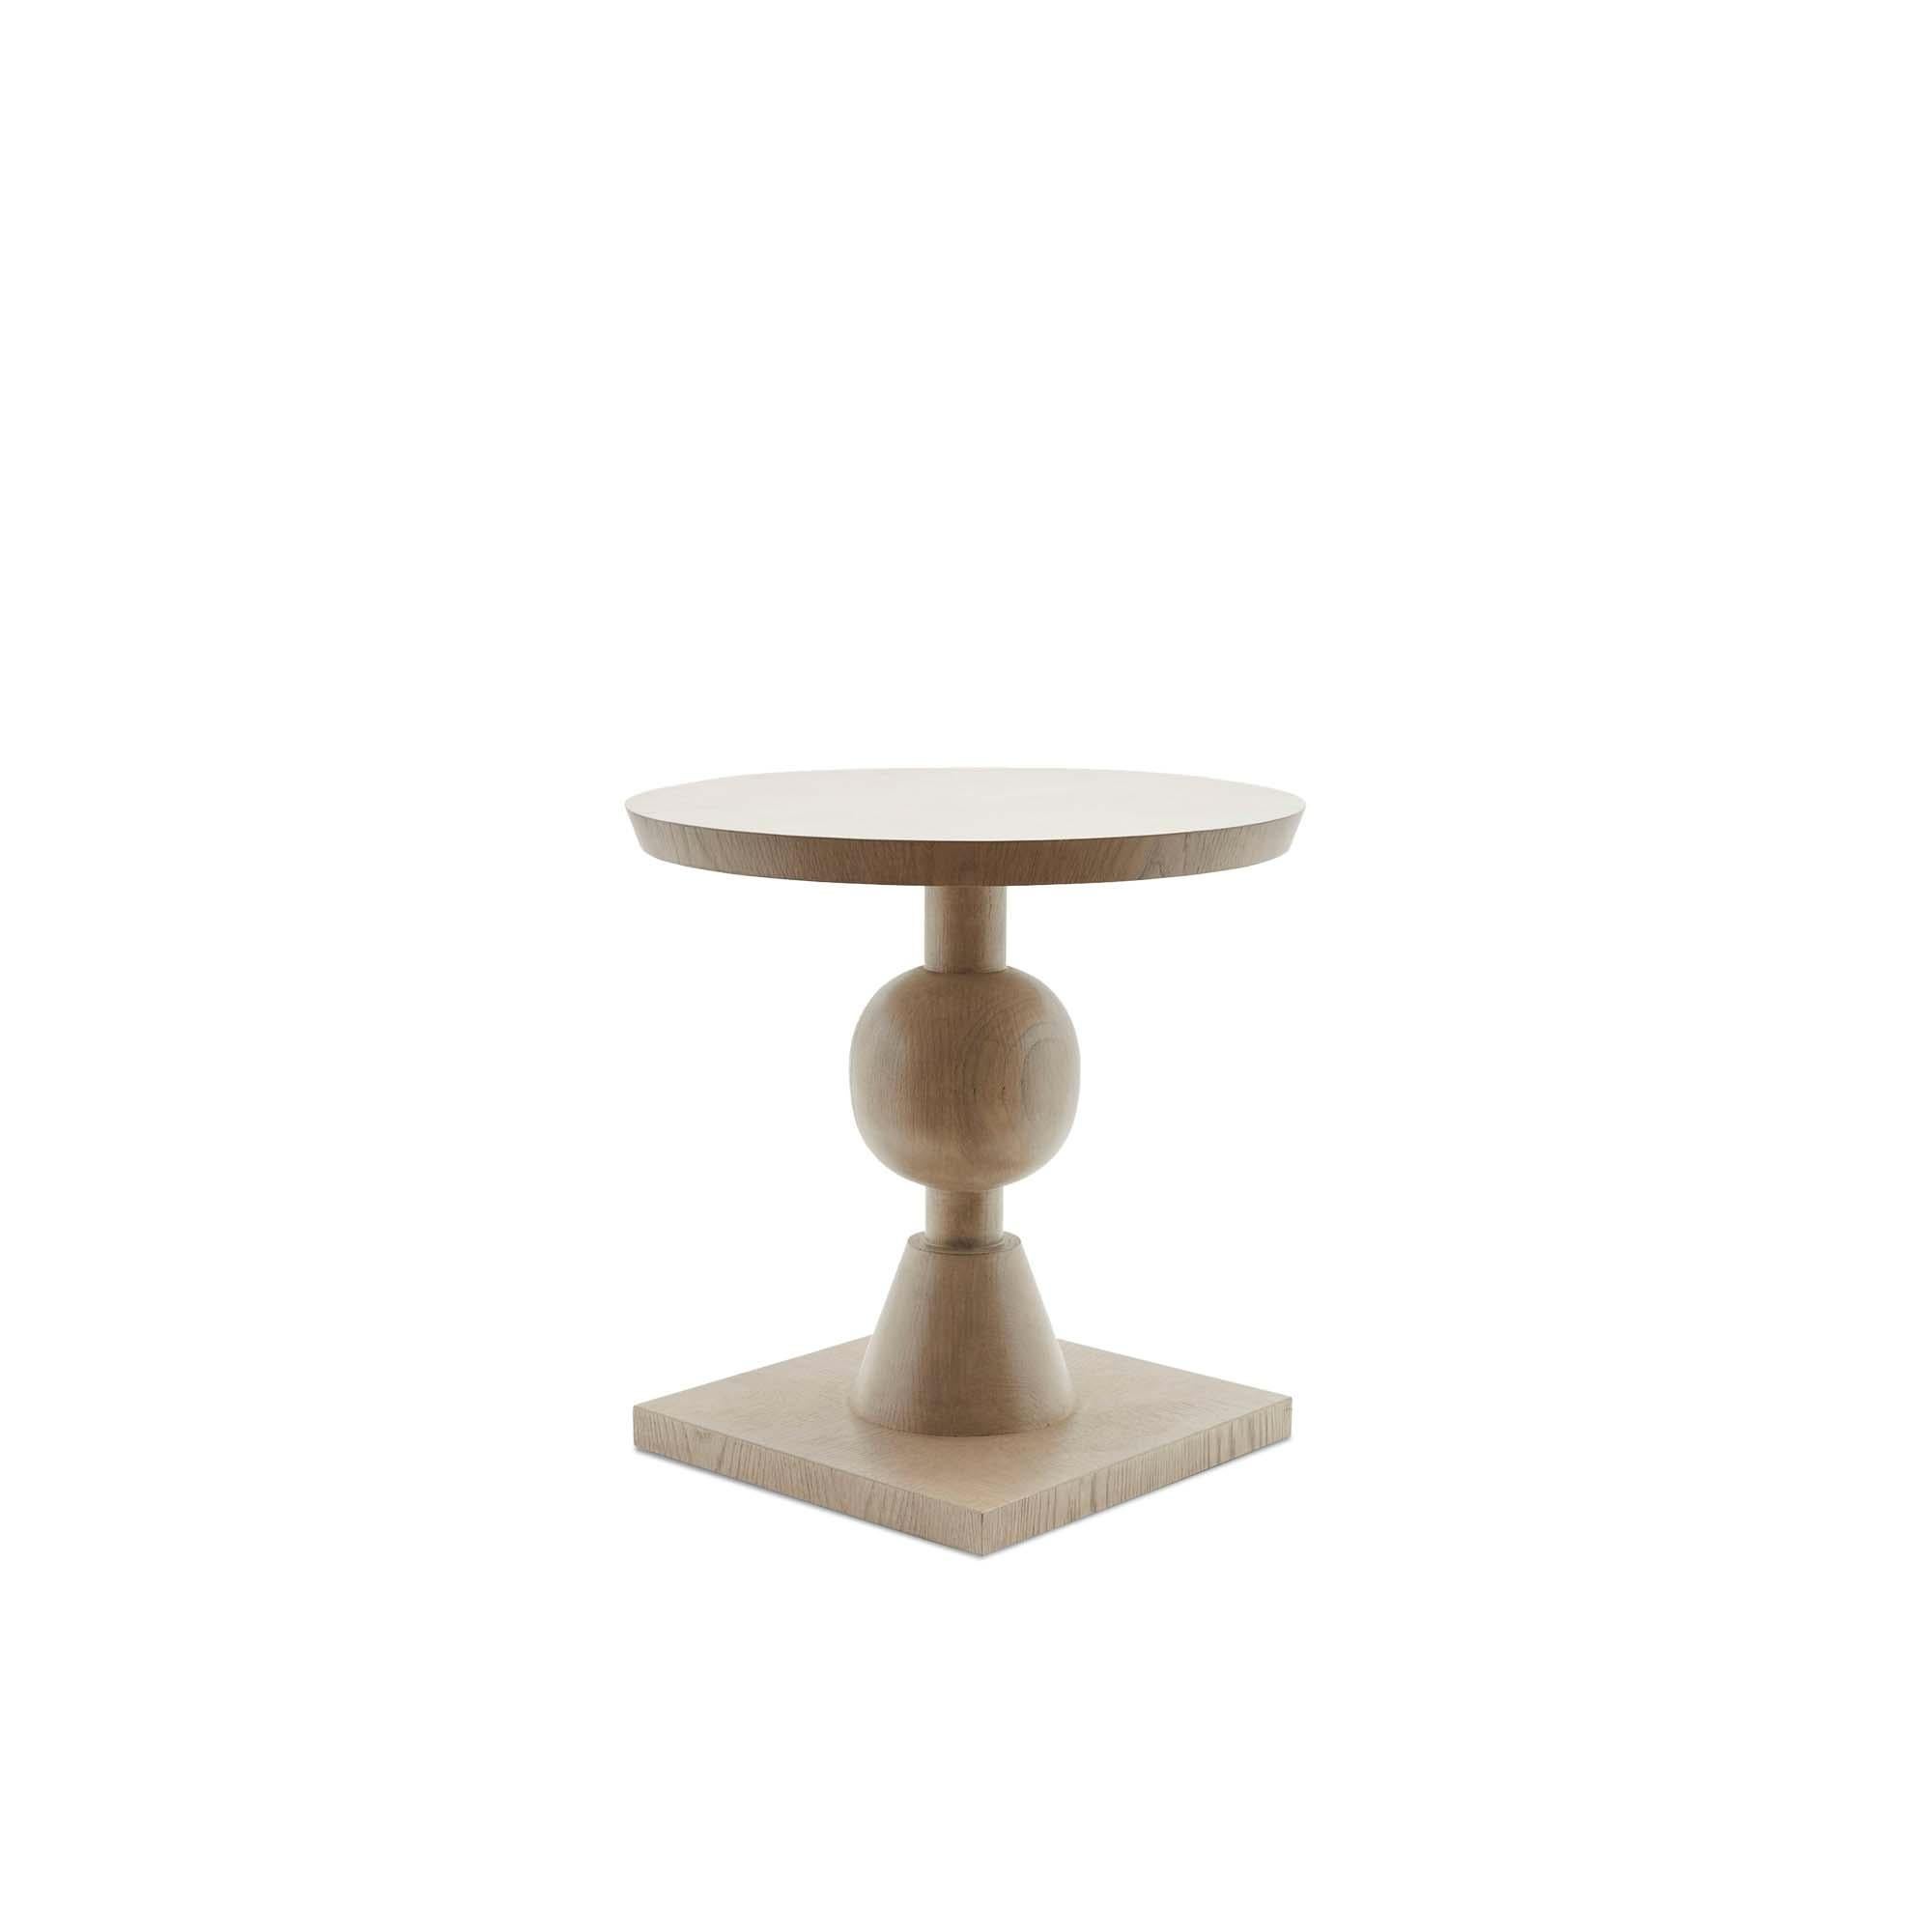 White washed oak sur table by Lawson-Fenning. The Sur Table features a series of geometric shapes stacked on top of each other with solid wood details. Available in American walnut or white oak.

The Lawson-Fenning Collection is designed and